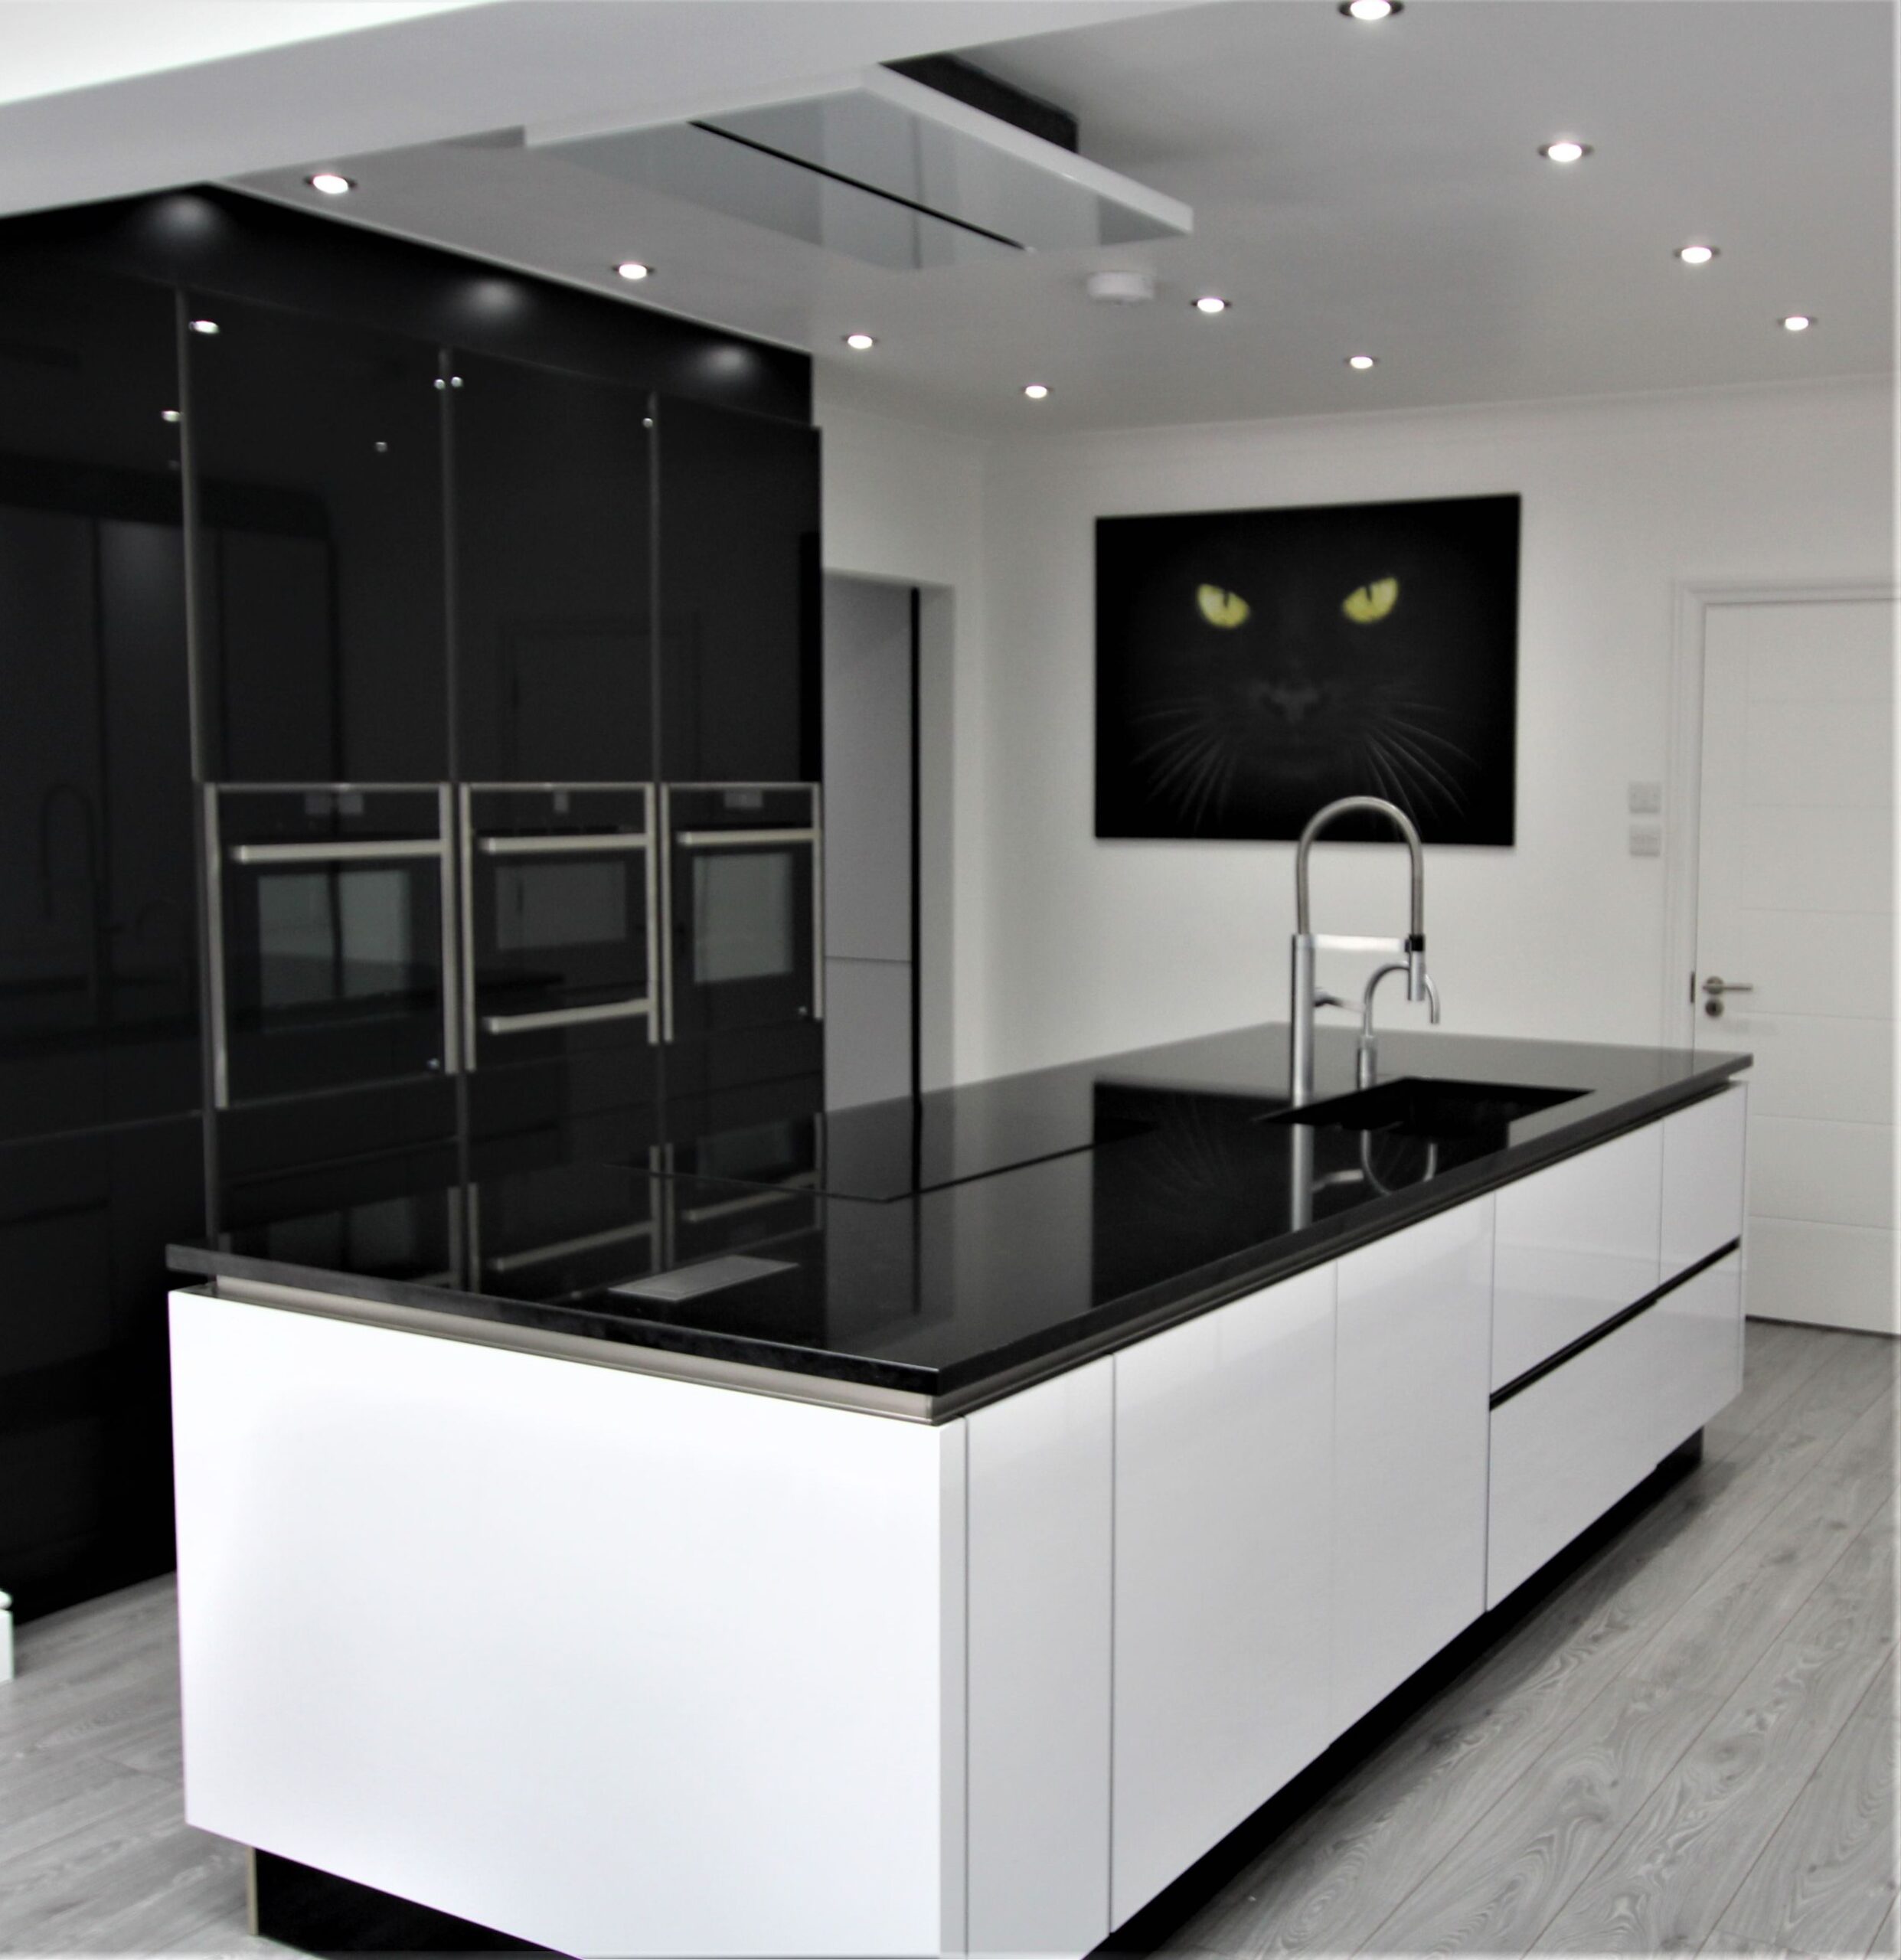 German kitchen designed, supplied and installed by Hampdens German kitchens and bedrooms in Hadley Wood.